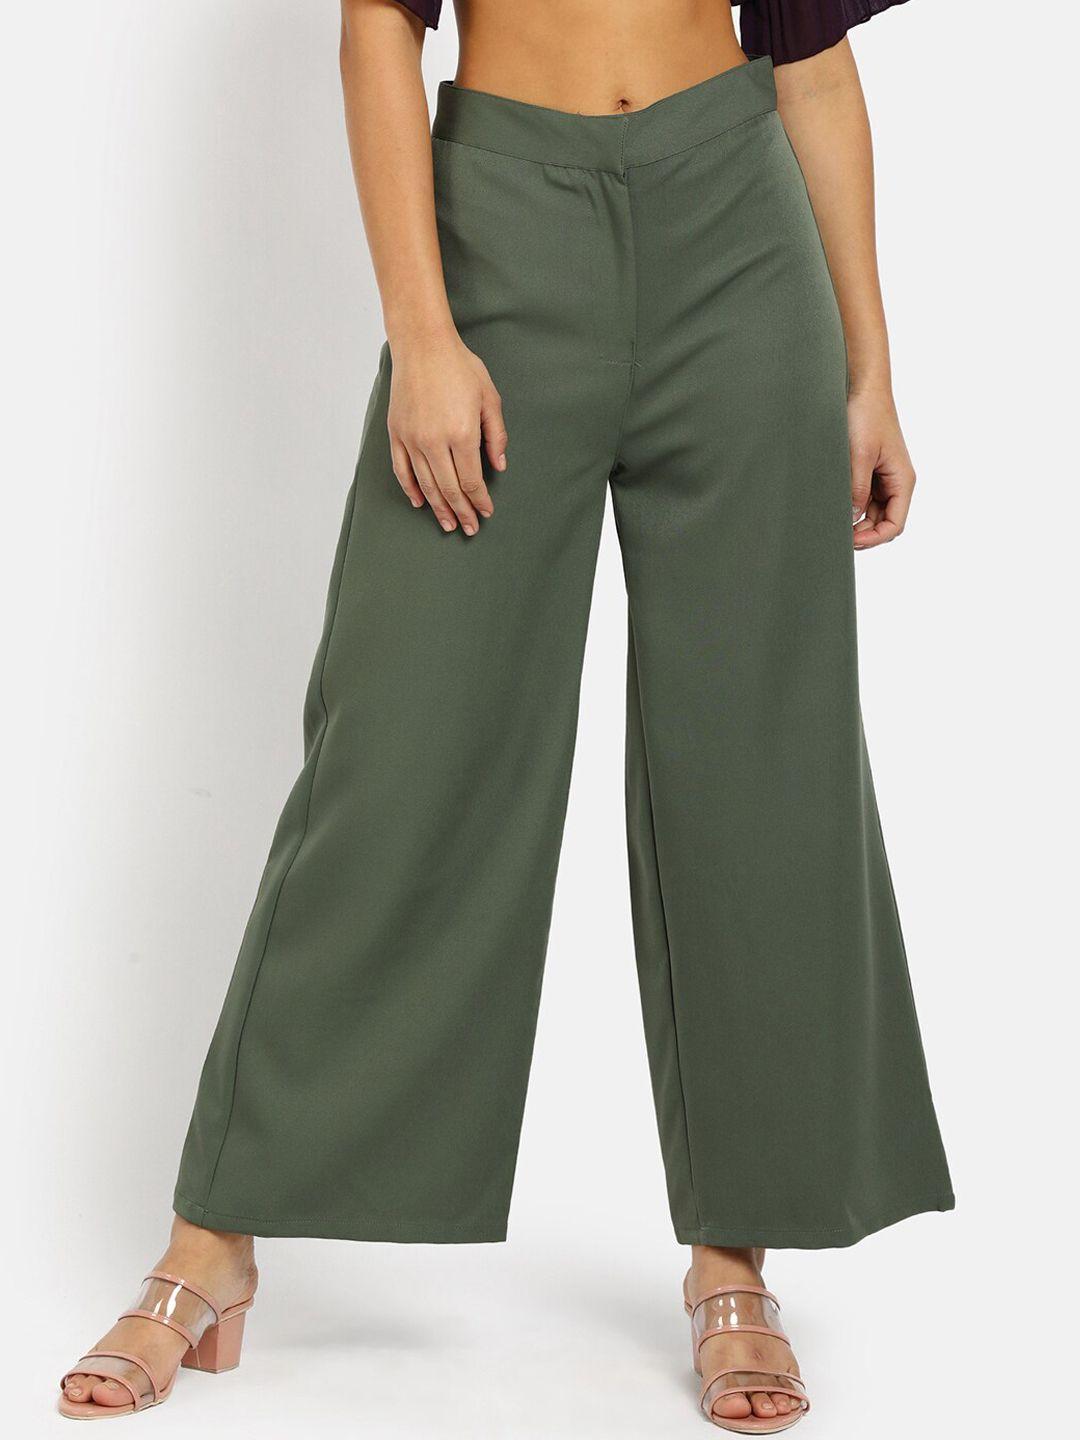 v-mart women olive green solid classic trousers